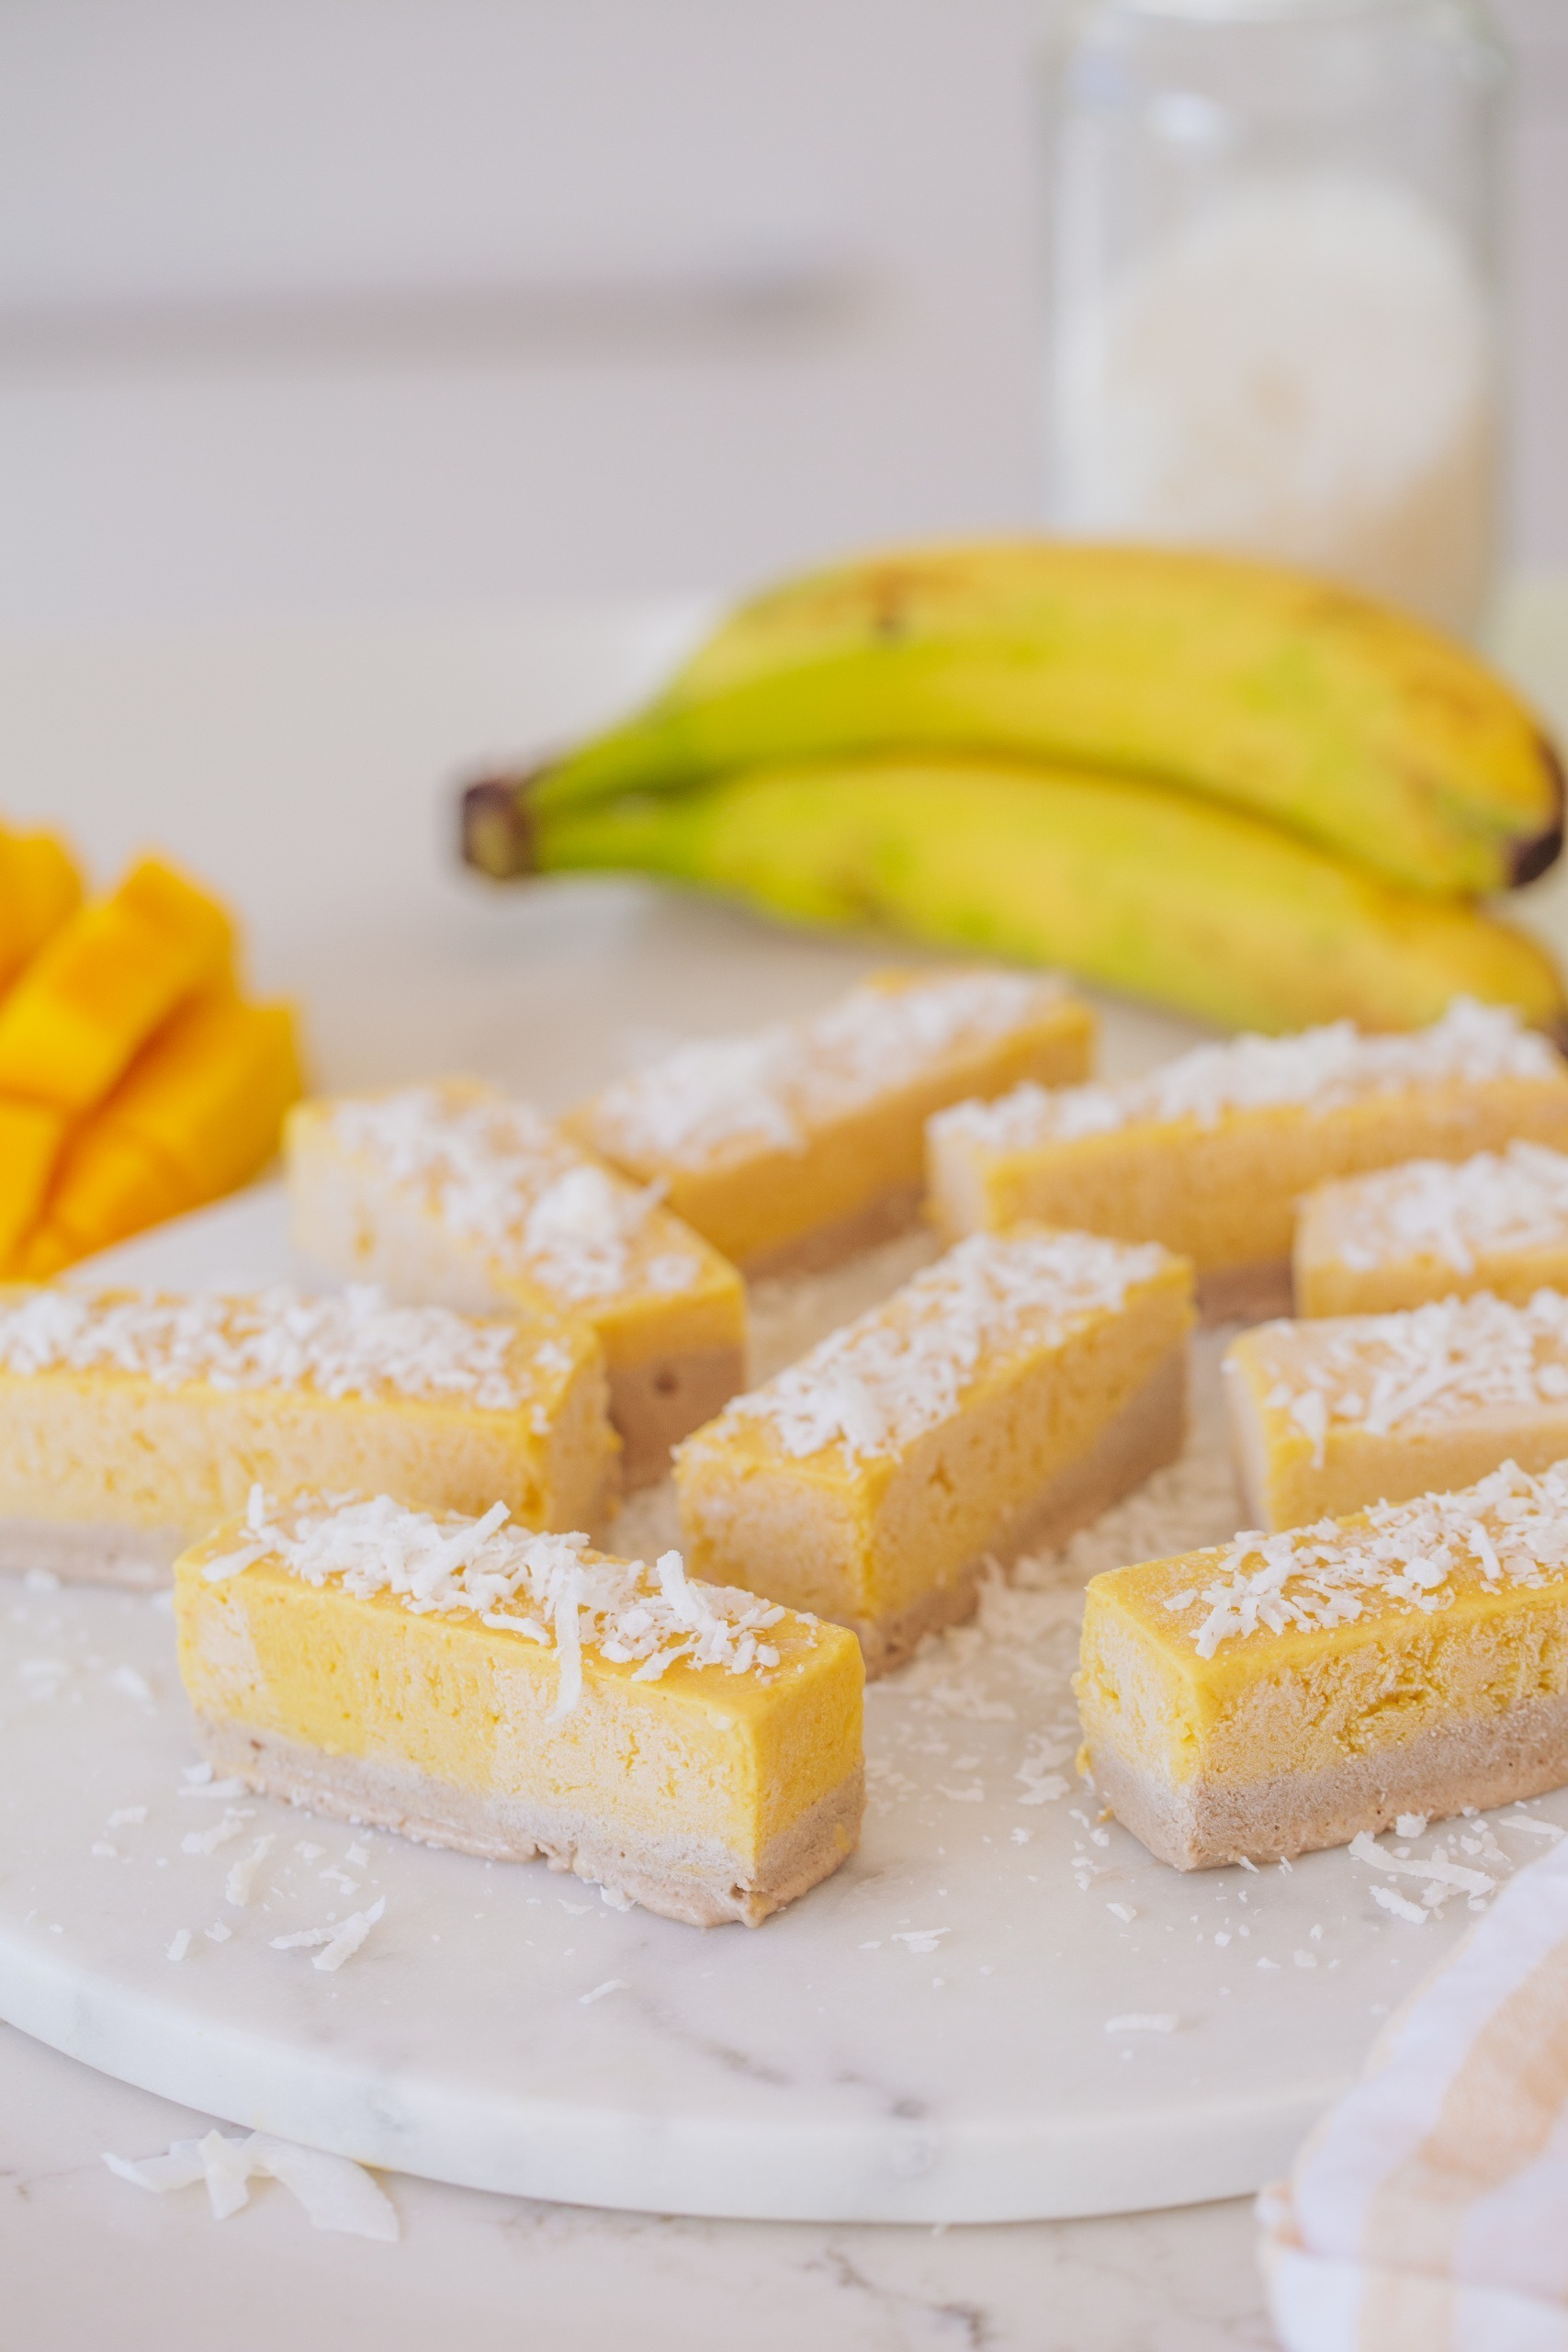 Mango banana and coconut tropical ice cream bars with shredded coconut on top and a bunch of bananas.